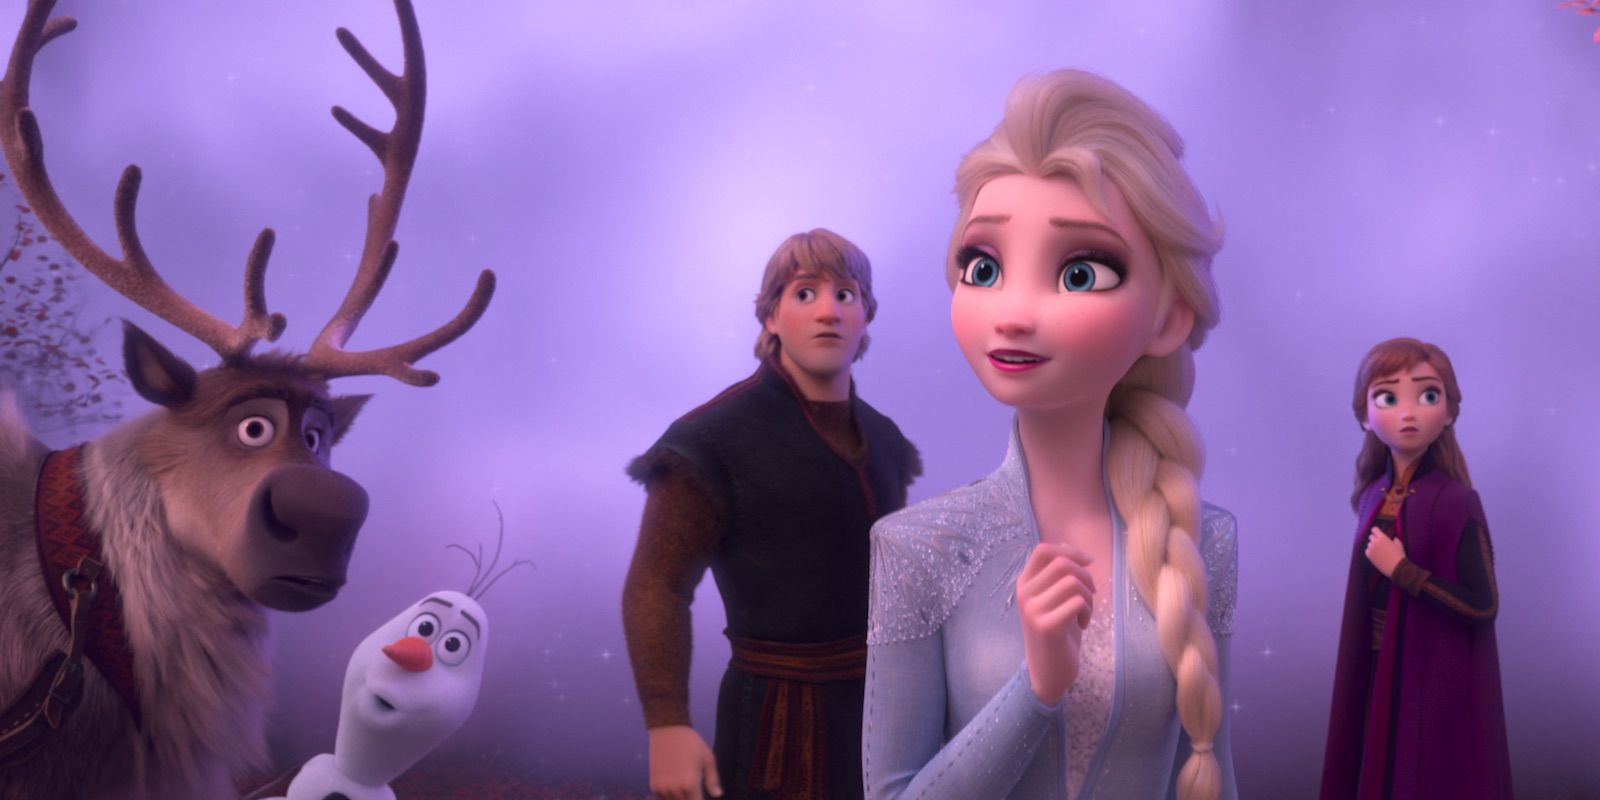 Sven, Olaf, Kristoff, Elsa and Anna in Frozen 2